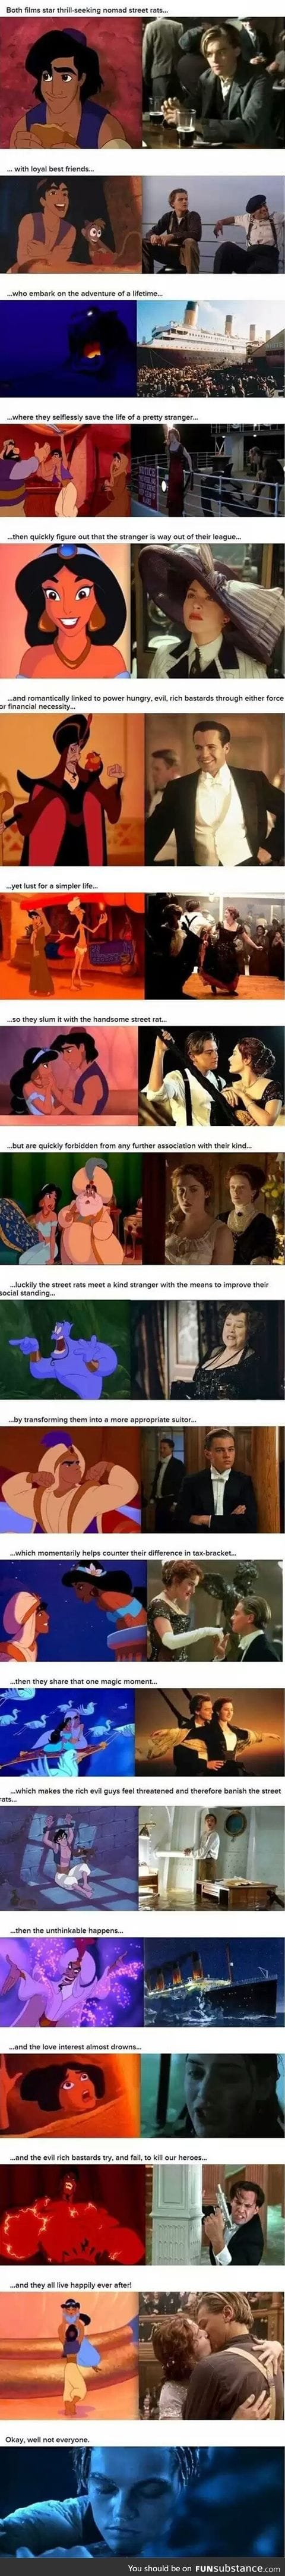 Proof that Titanic and Aladdin are practically the same